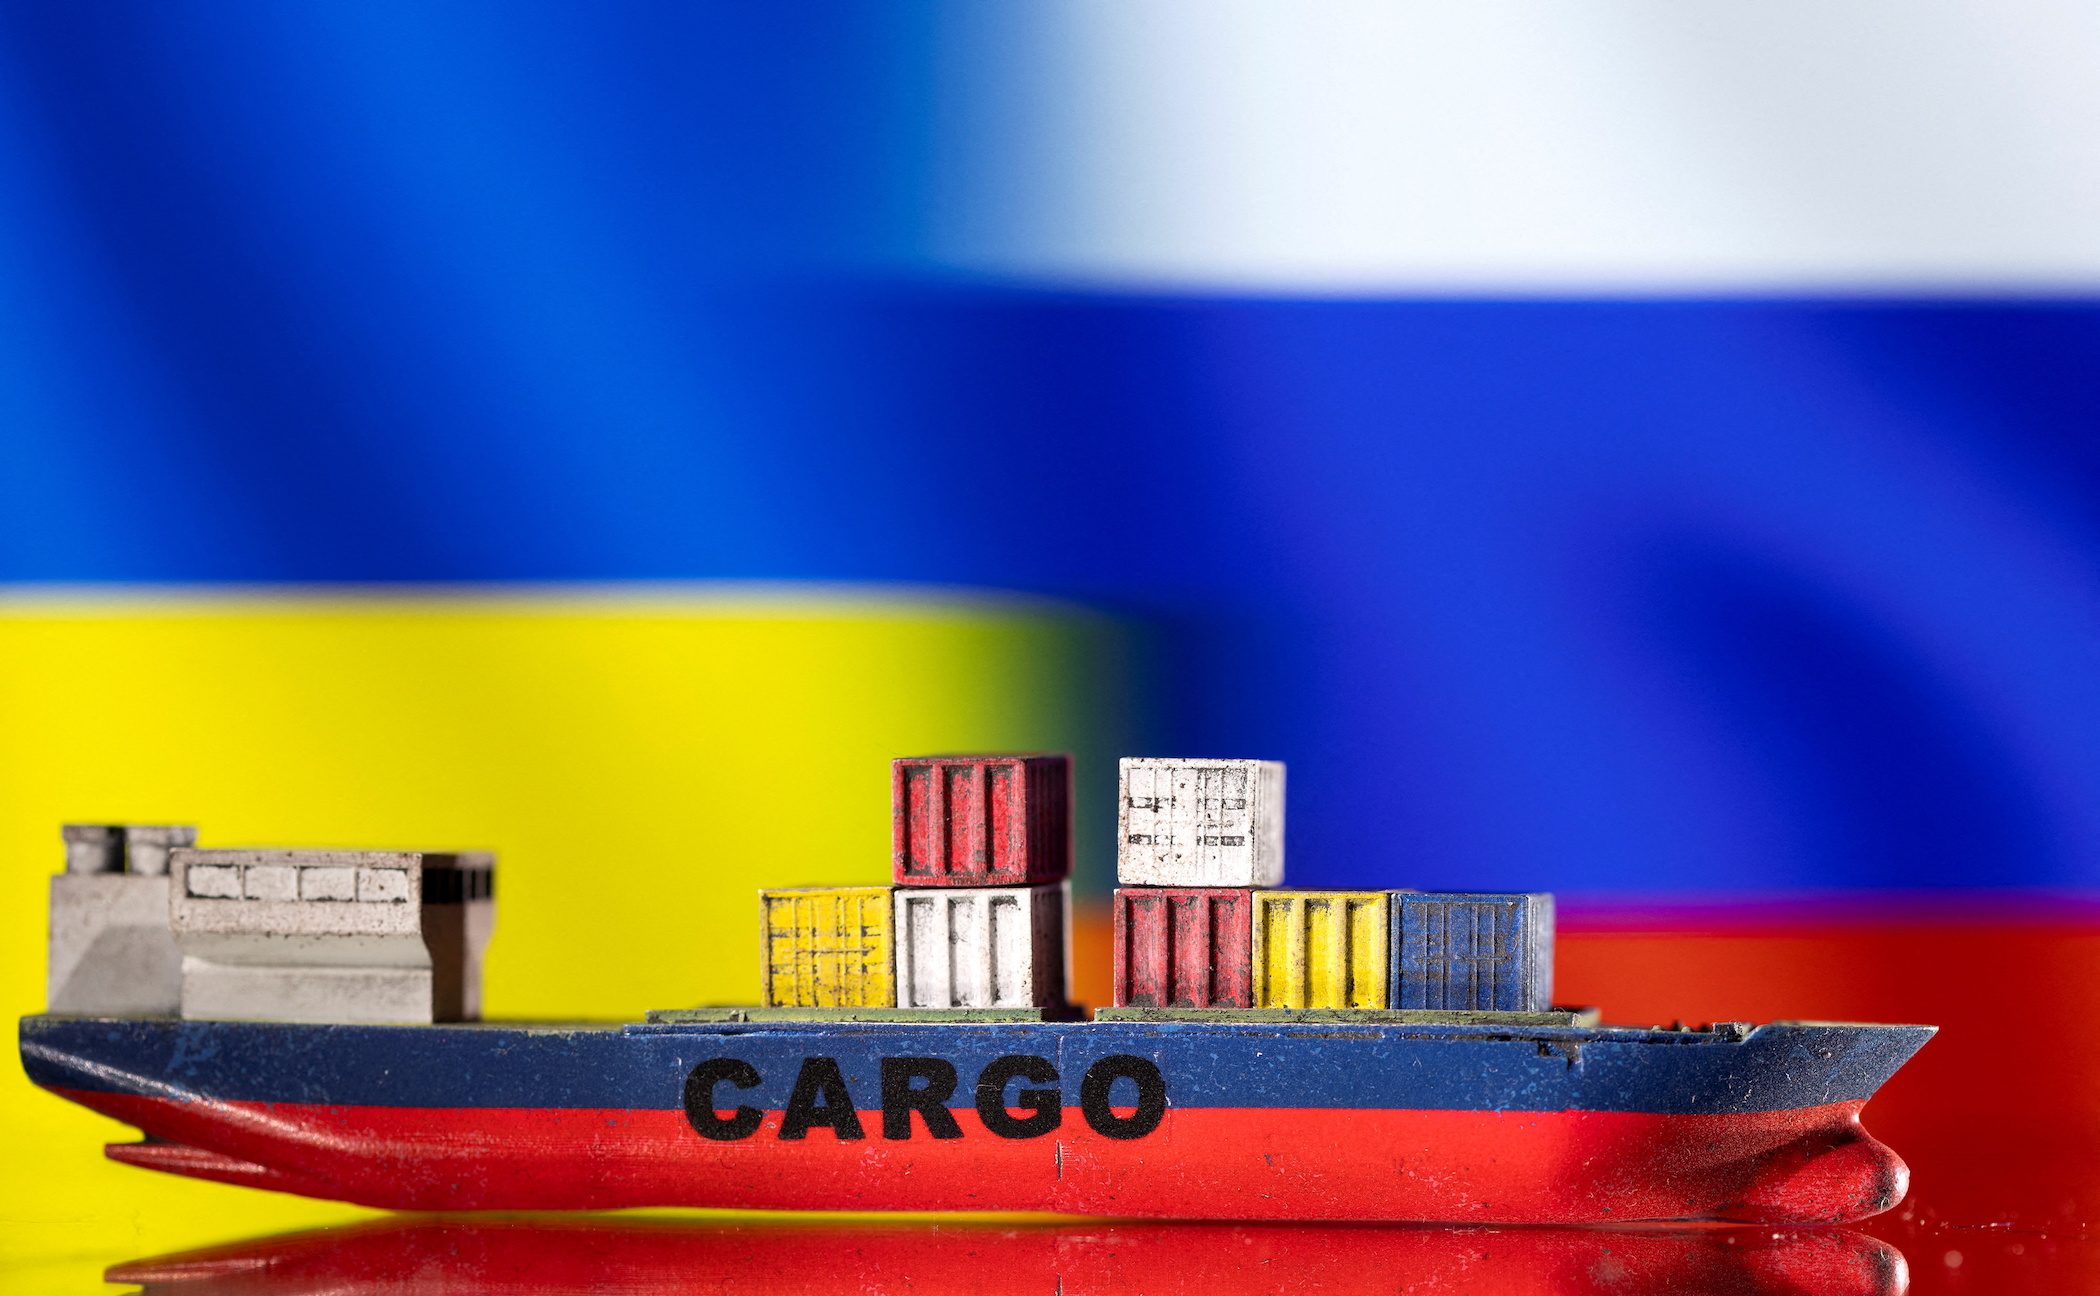 Shipping industry urges safe passage for trapped ships and crews in Ukraine